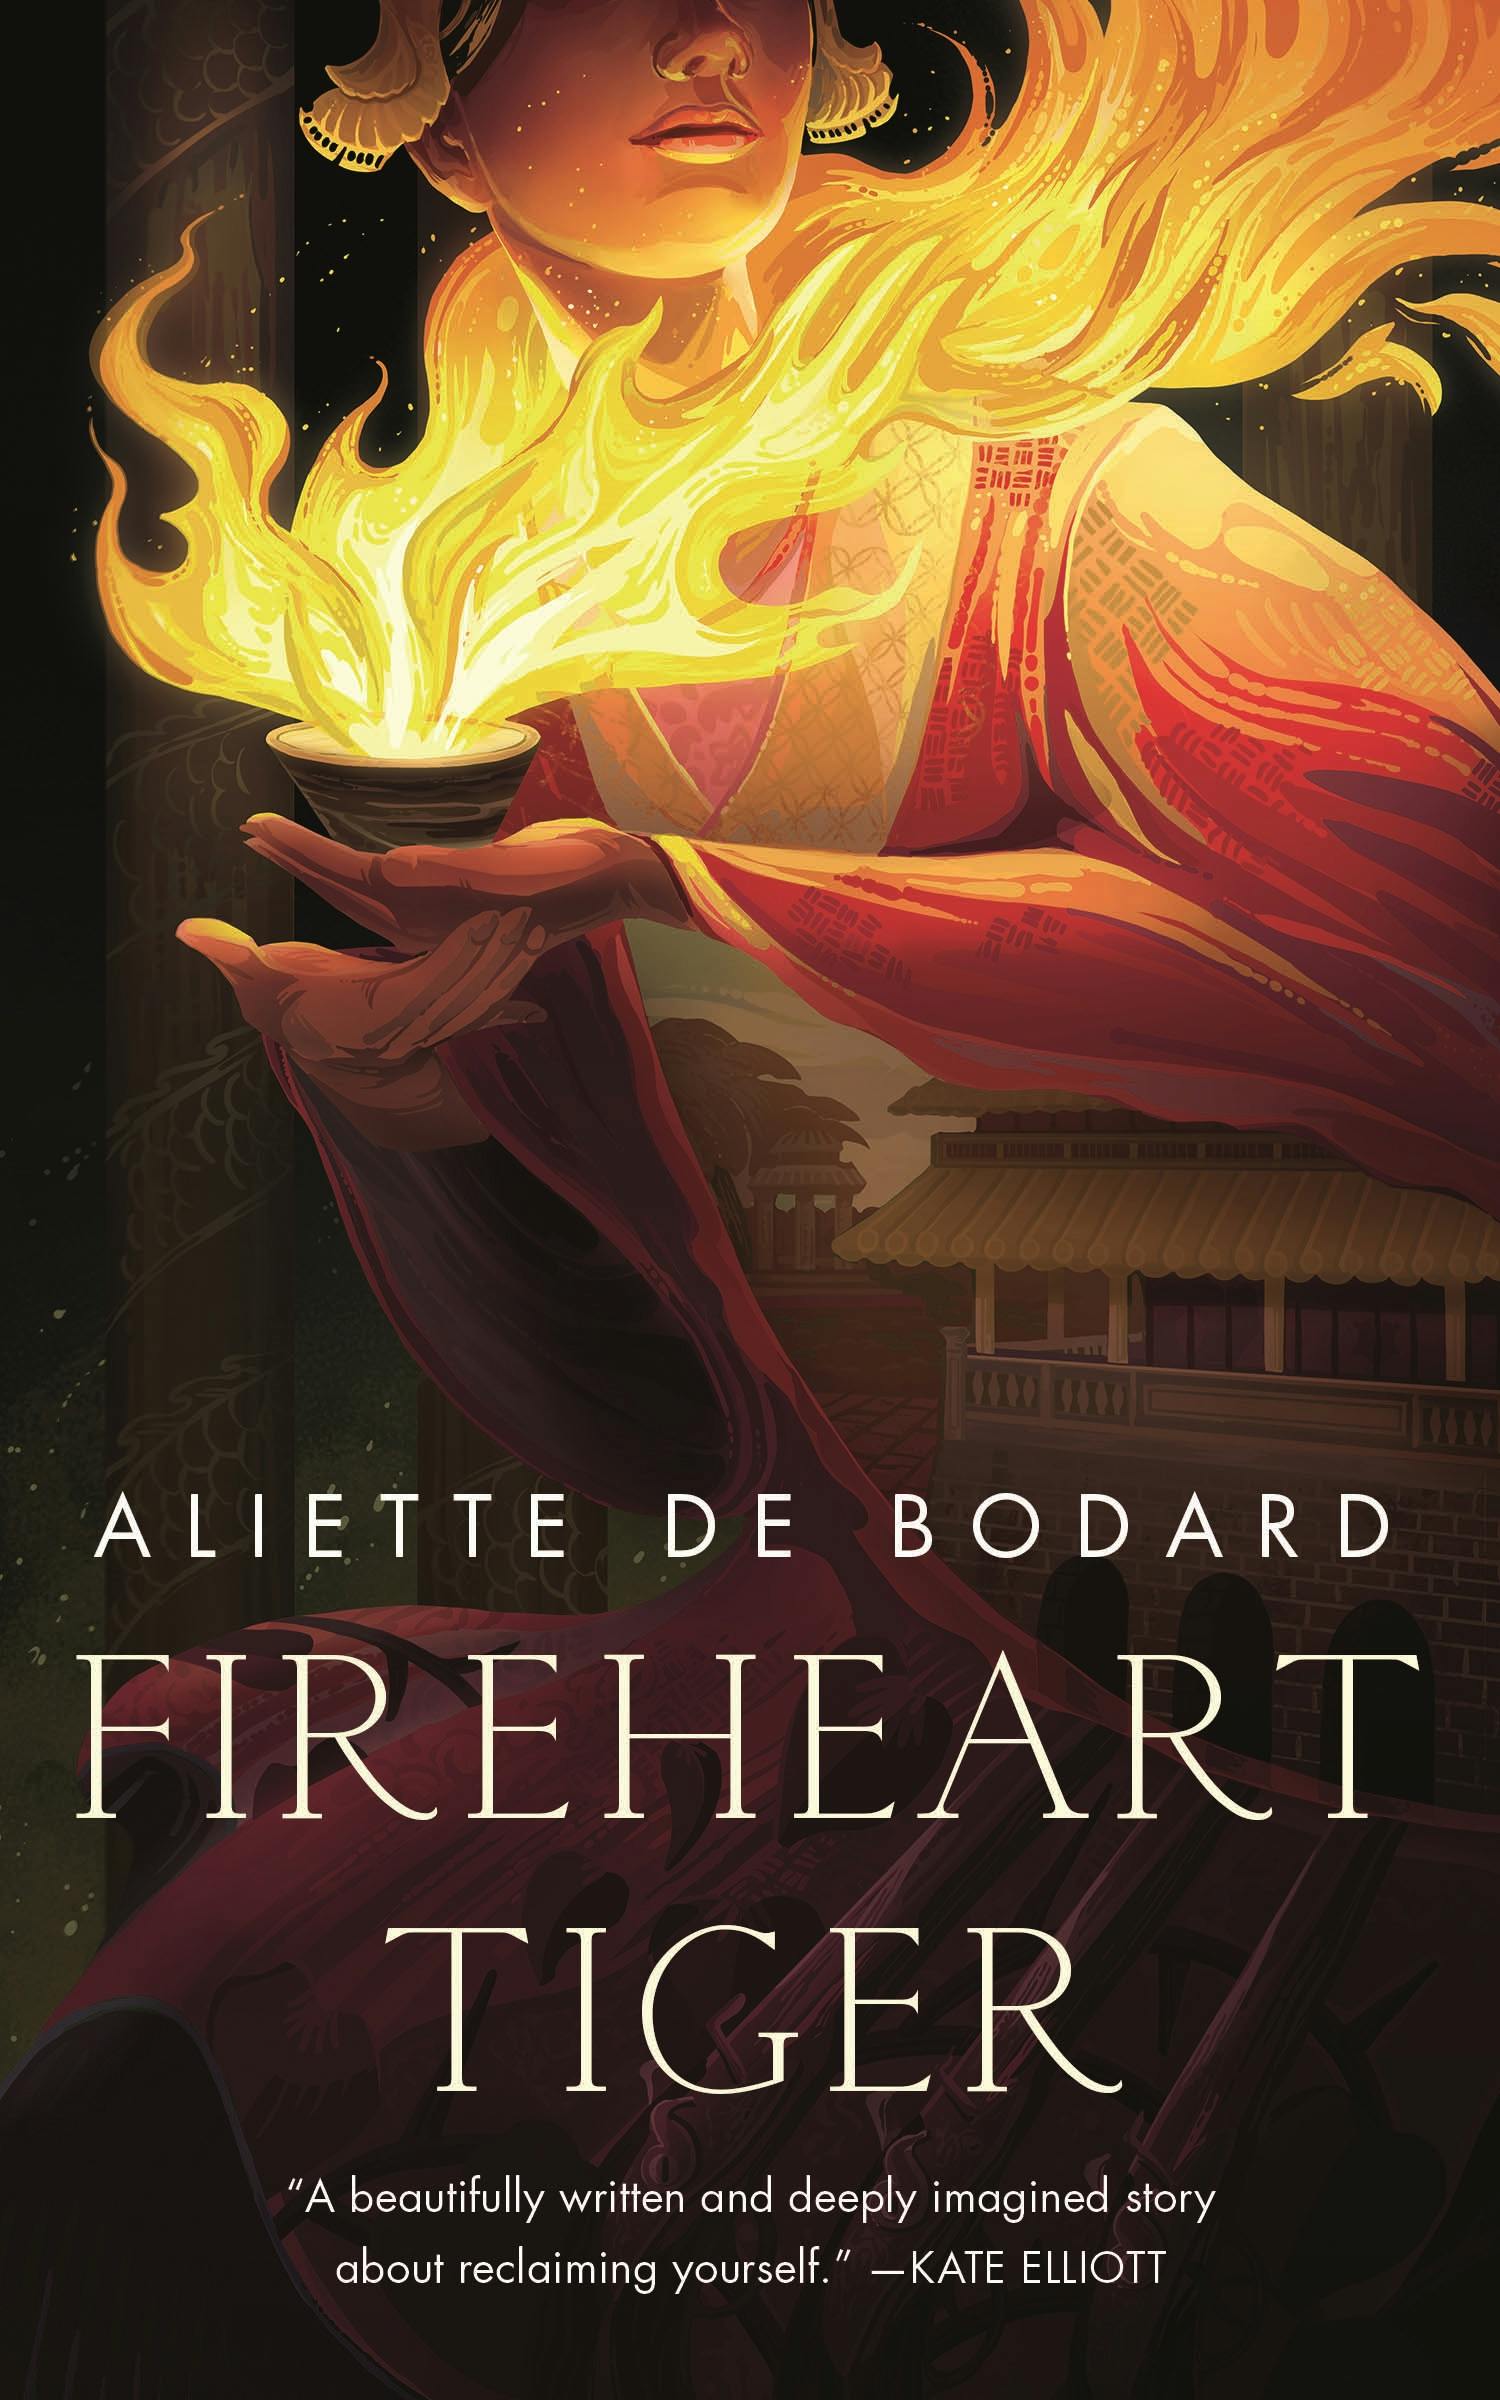 Cover for the book titled as: Fireheart Tiger